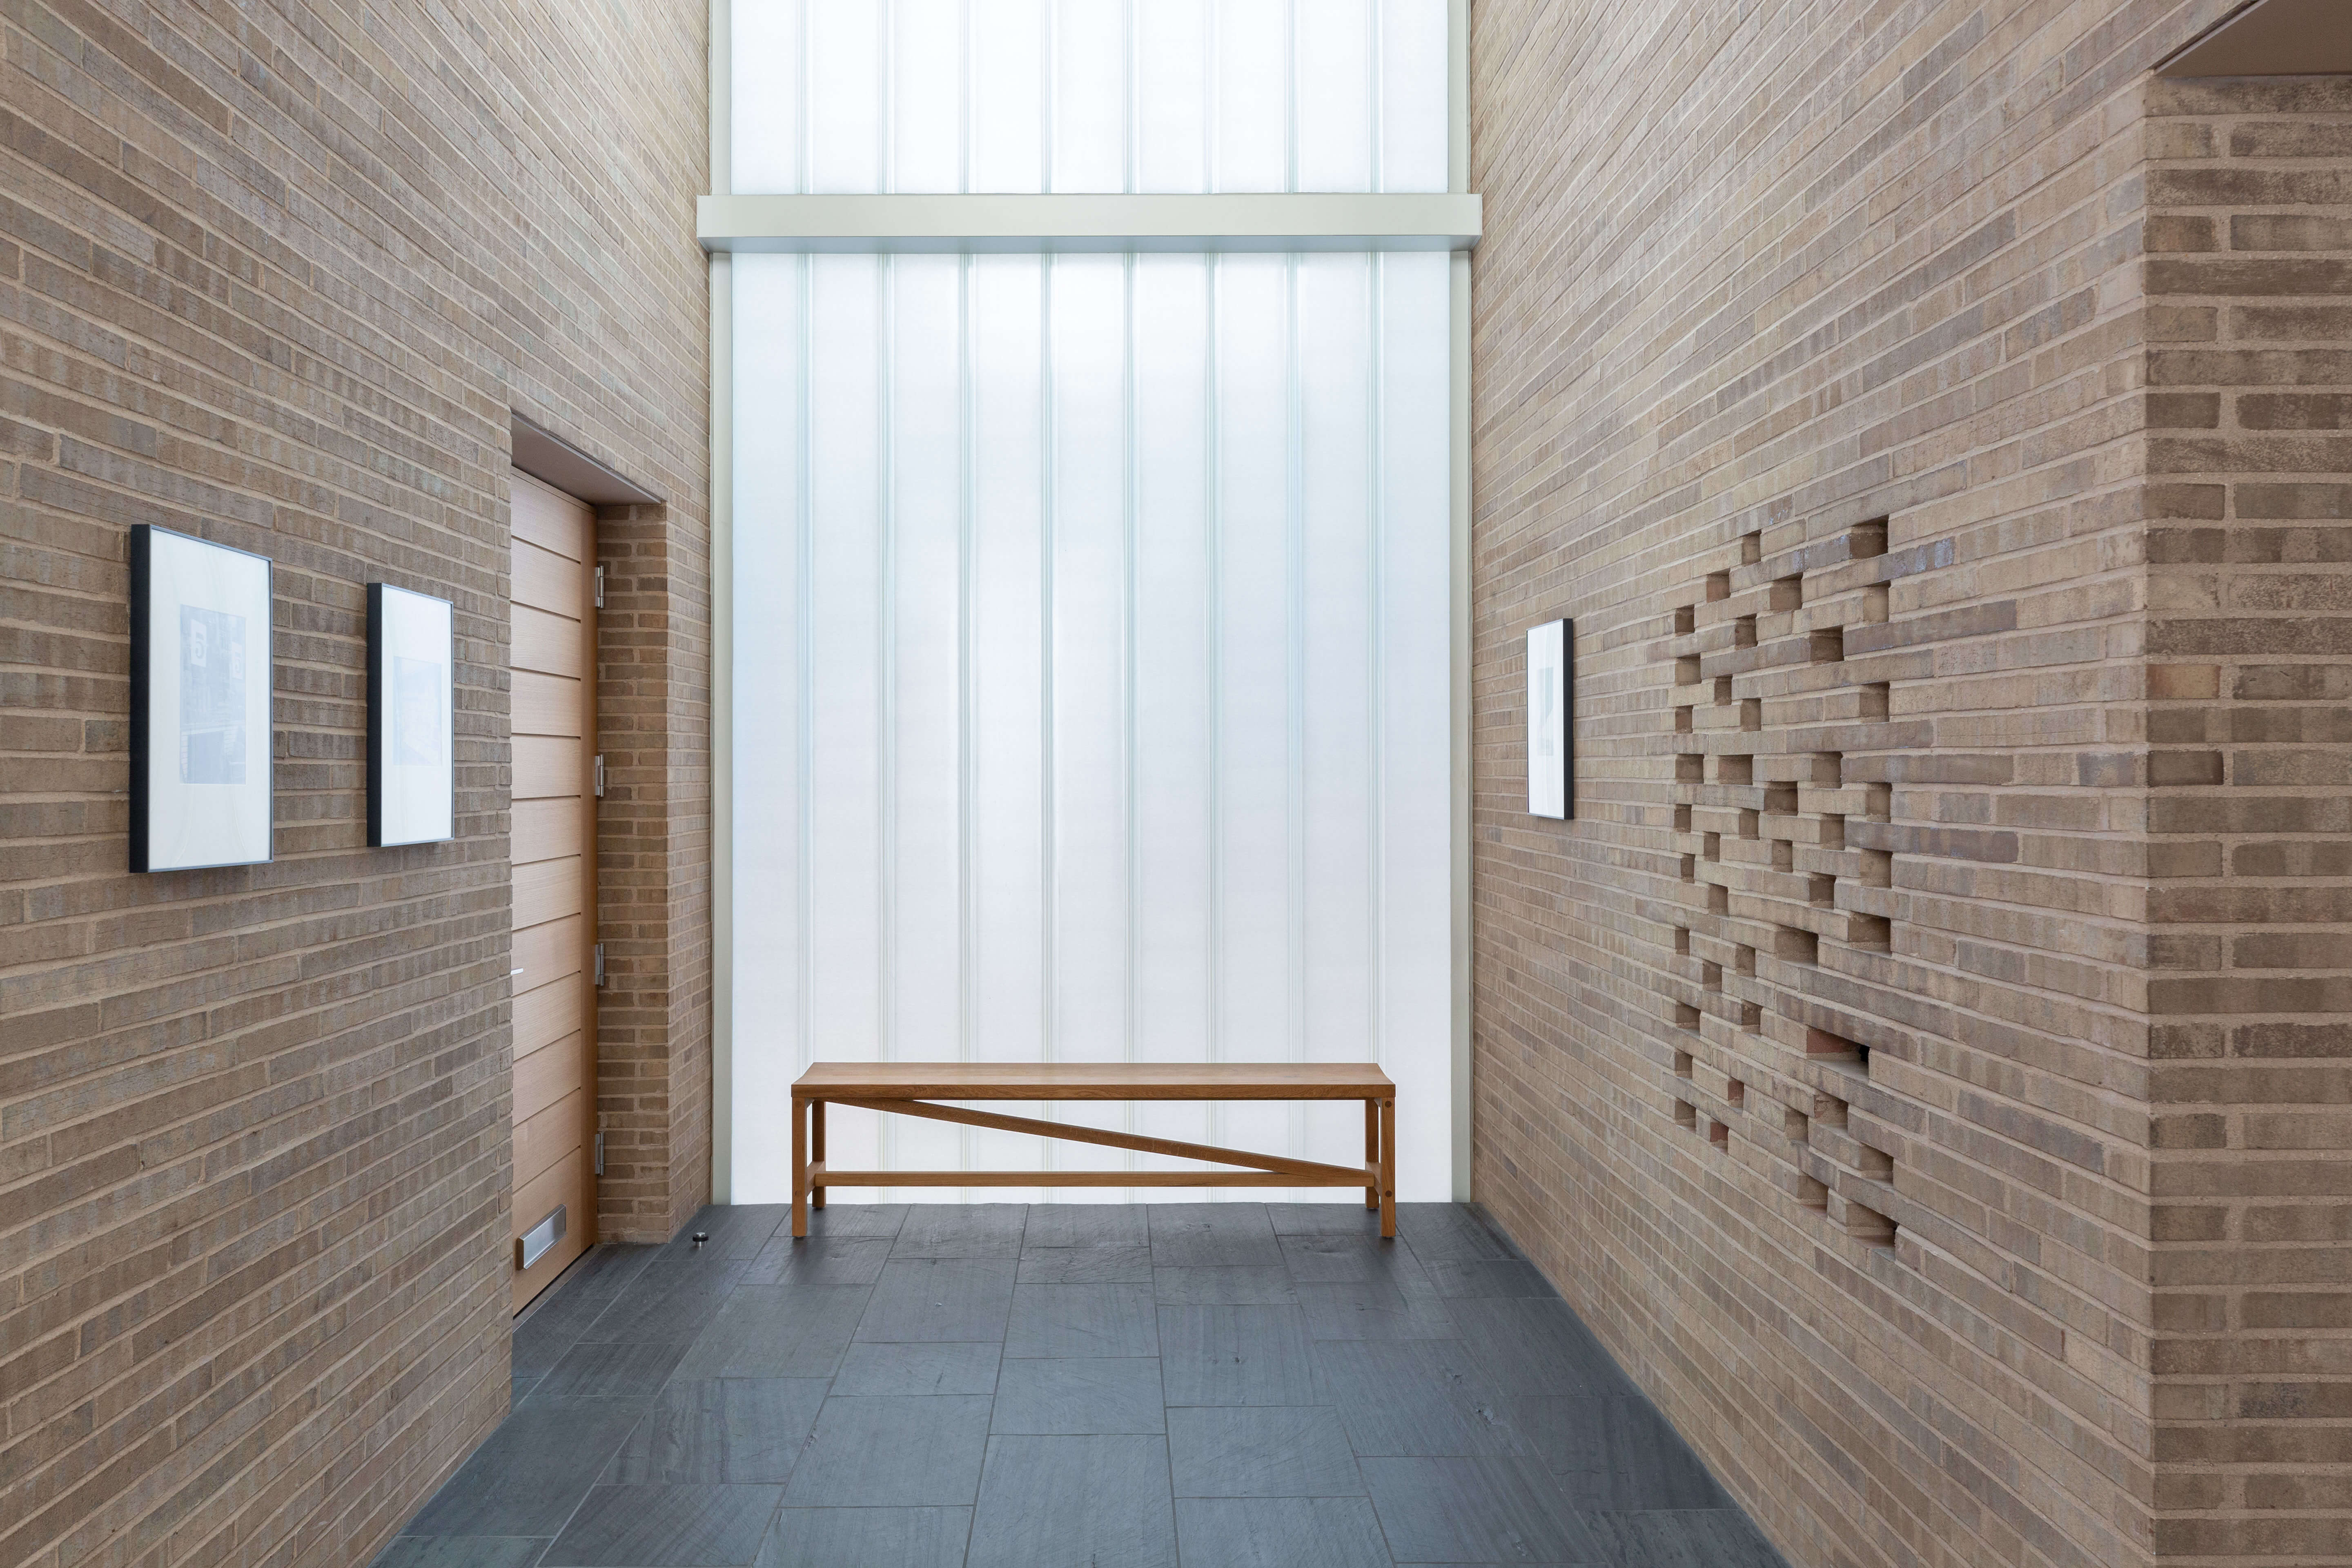 Interior brick walls with large vertical window and a bench